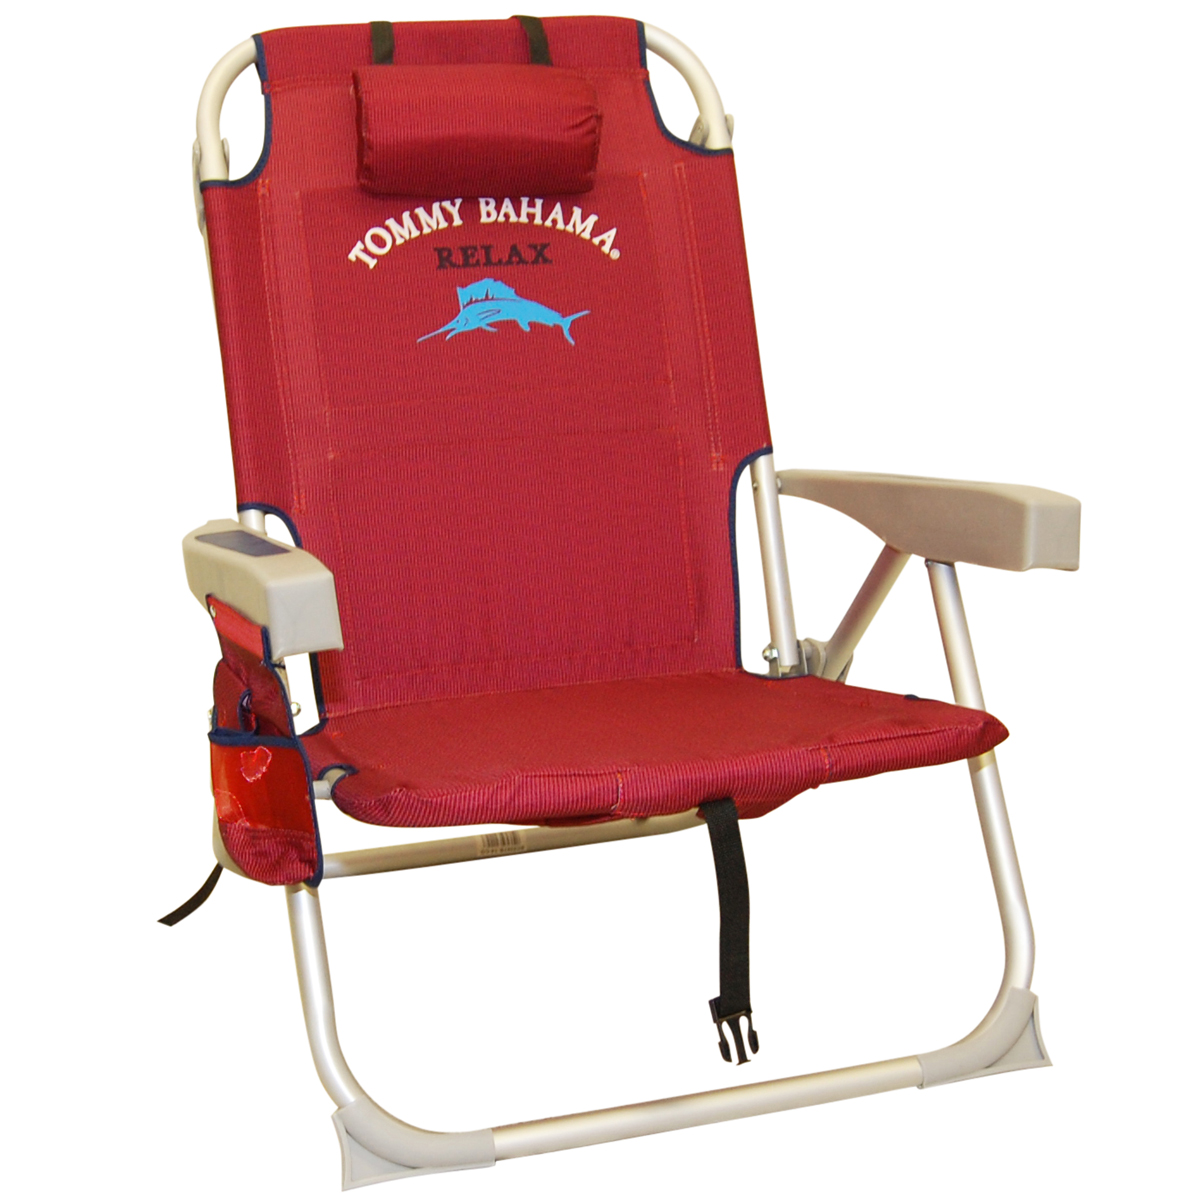 Tommy Bahama Beach Chair | The Best Chair Review Blog